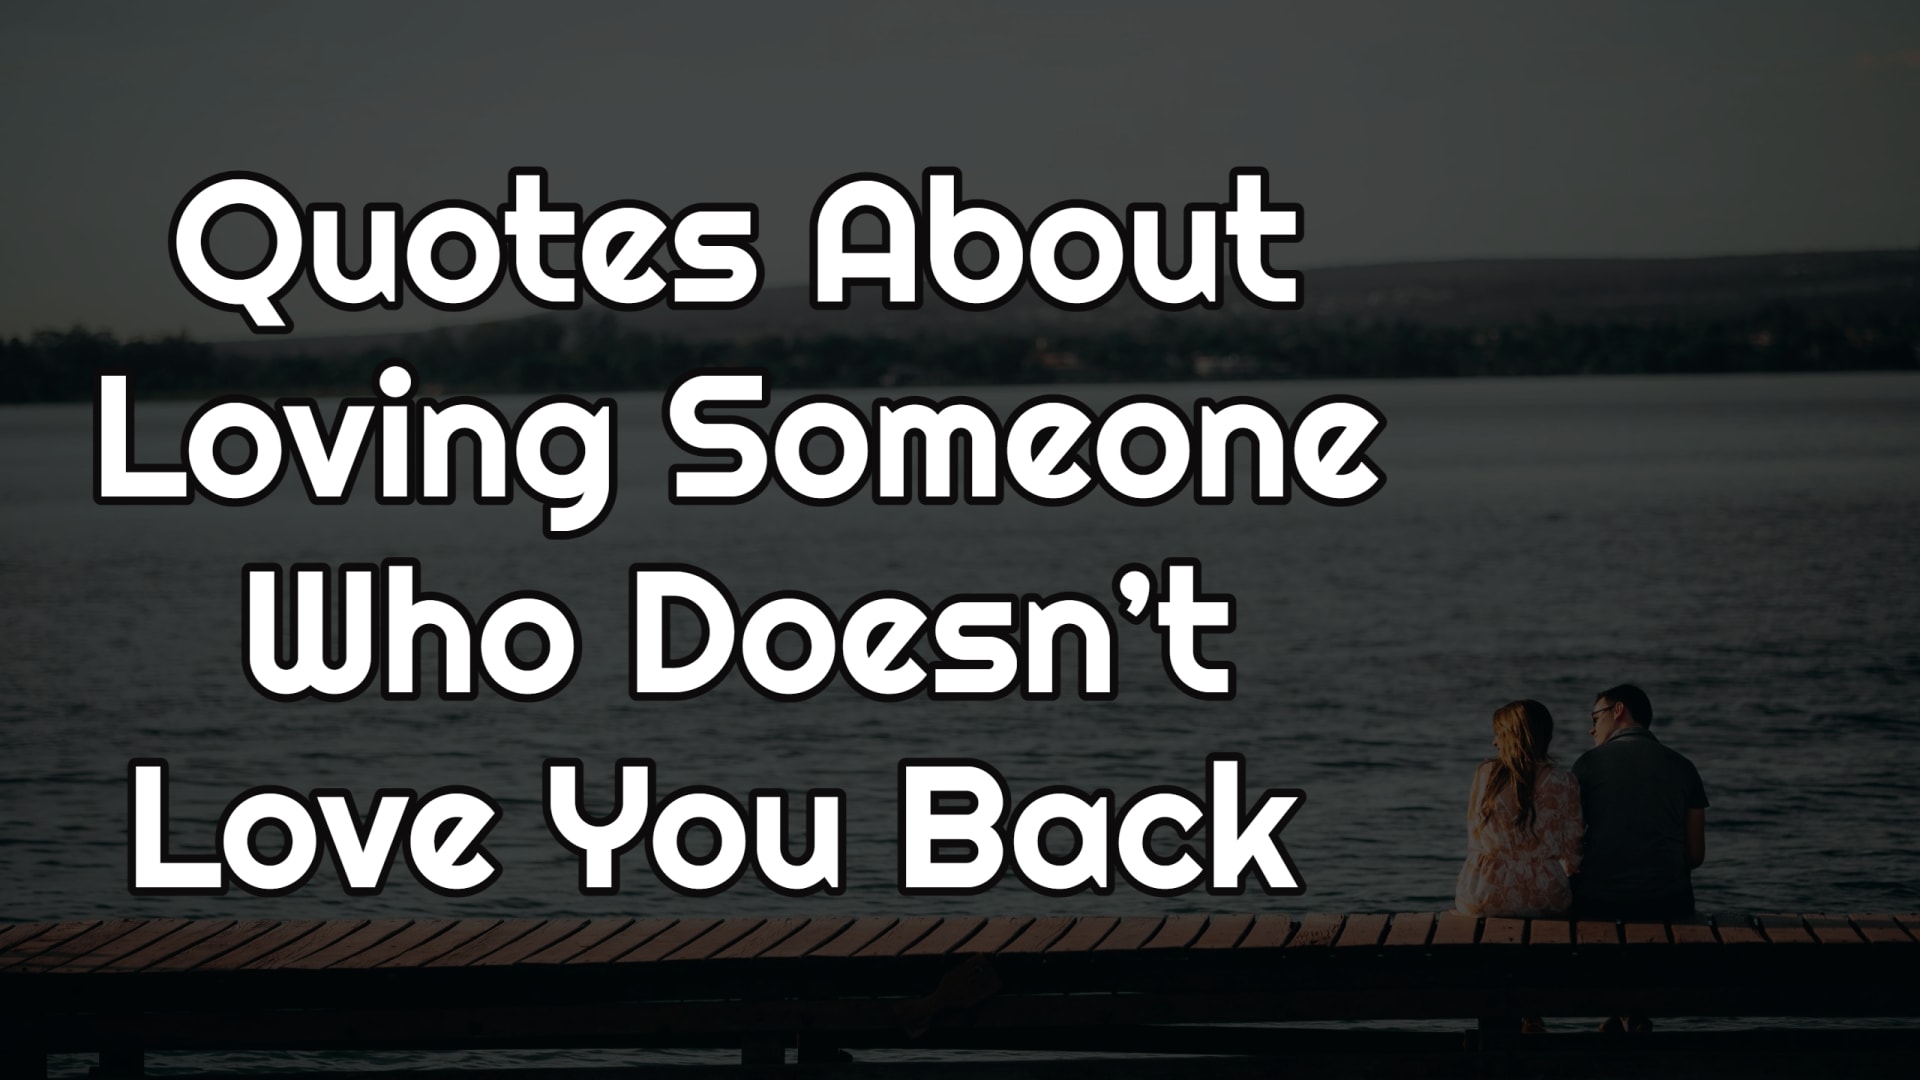 Quotes About Loving Someone Who Doesn’t Love You Back